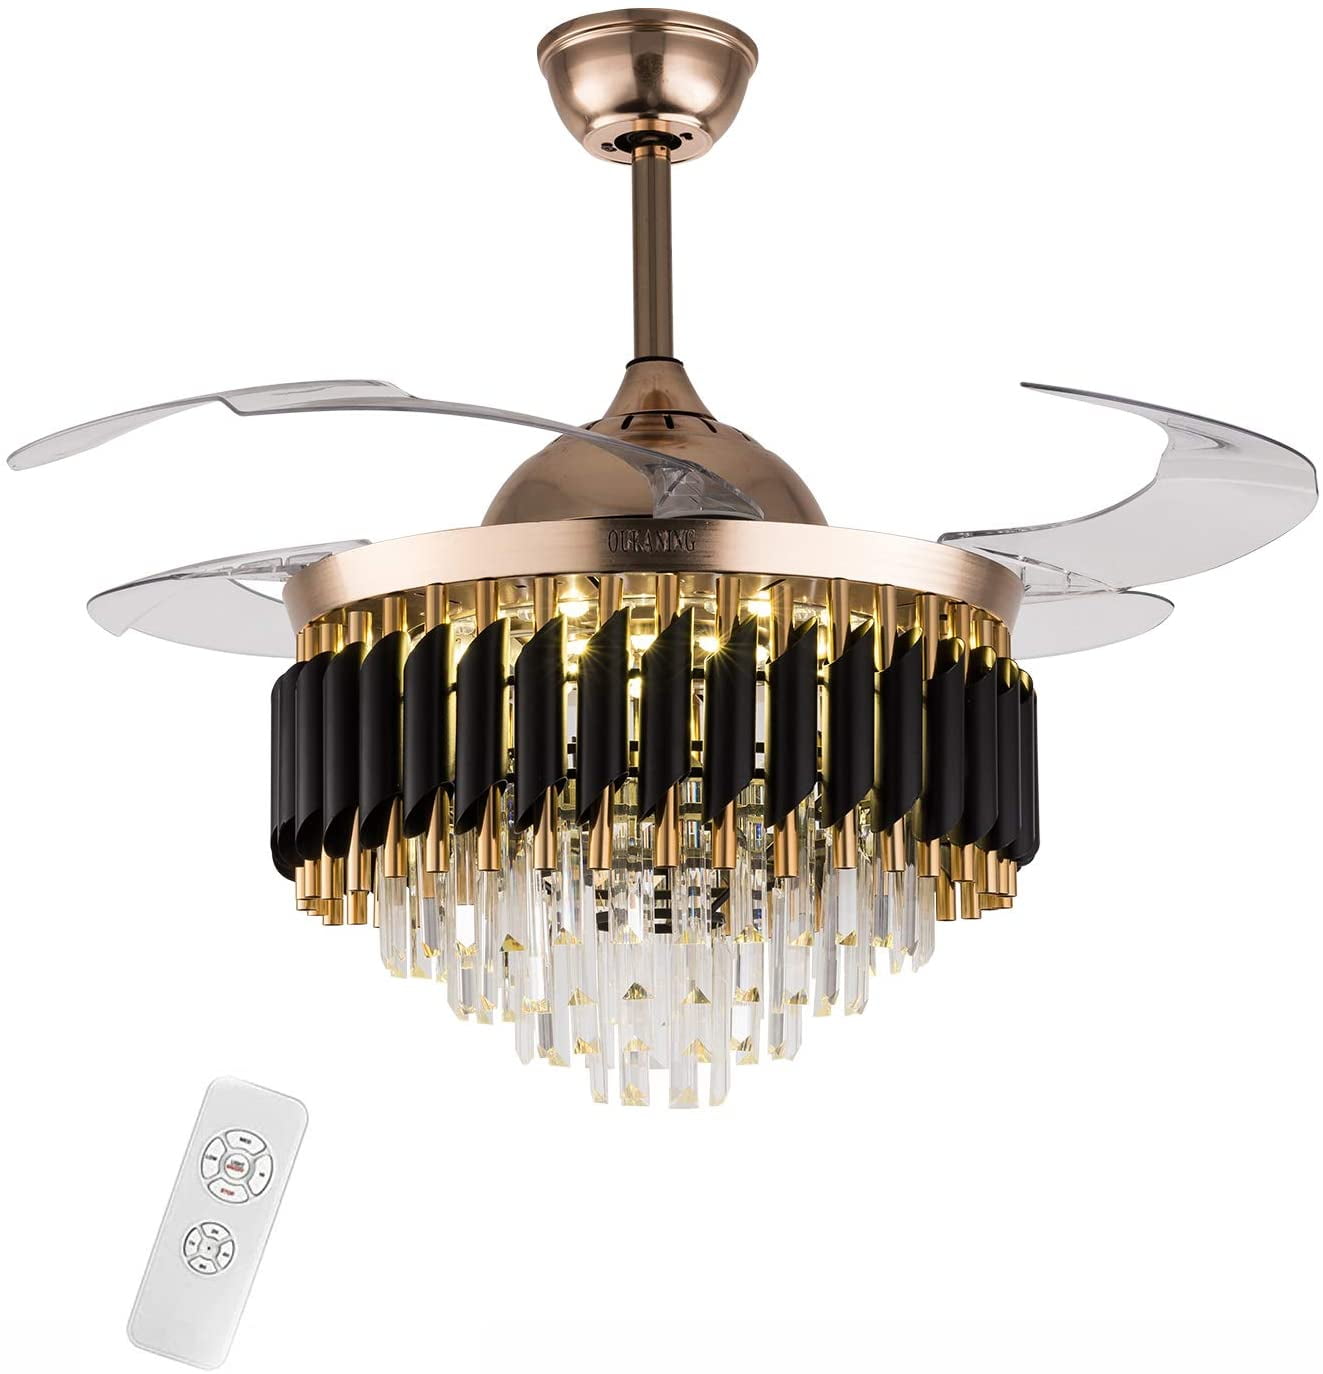 Details about   42" Remote Retractable Ceiling Fans LED Light Crystal Chandeliers Lighting Lamps 